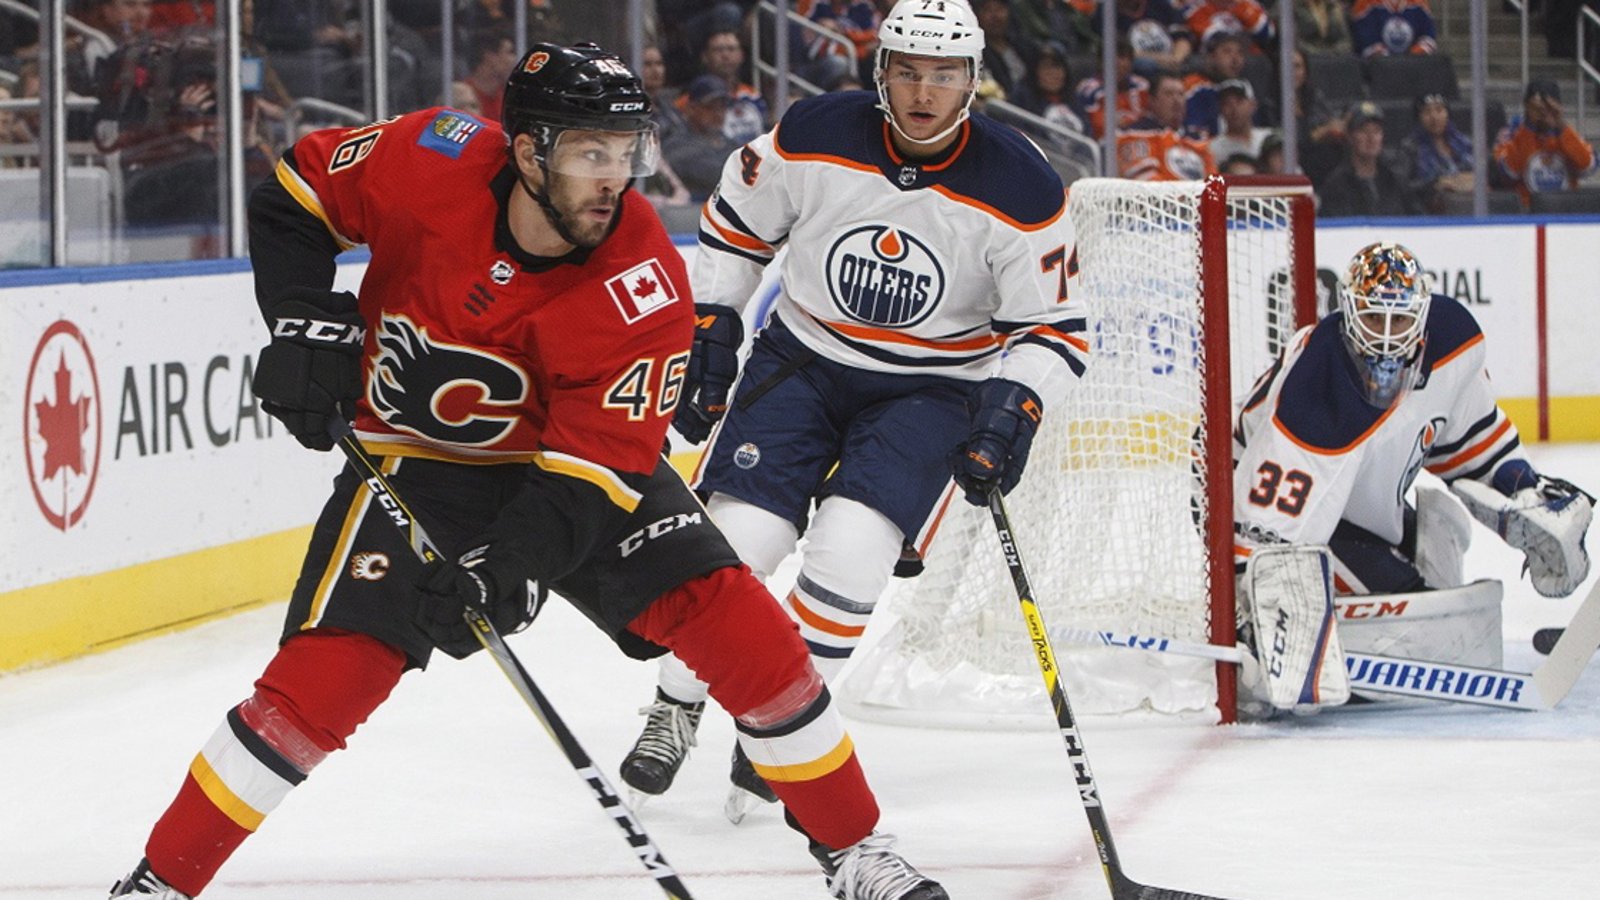 Breaking: Flames give up on free-agent signing, place him on waivers